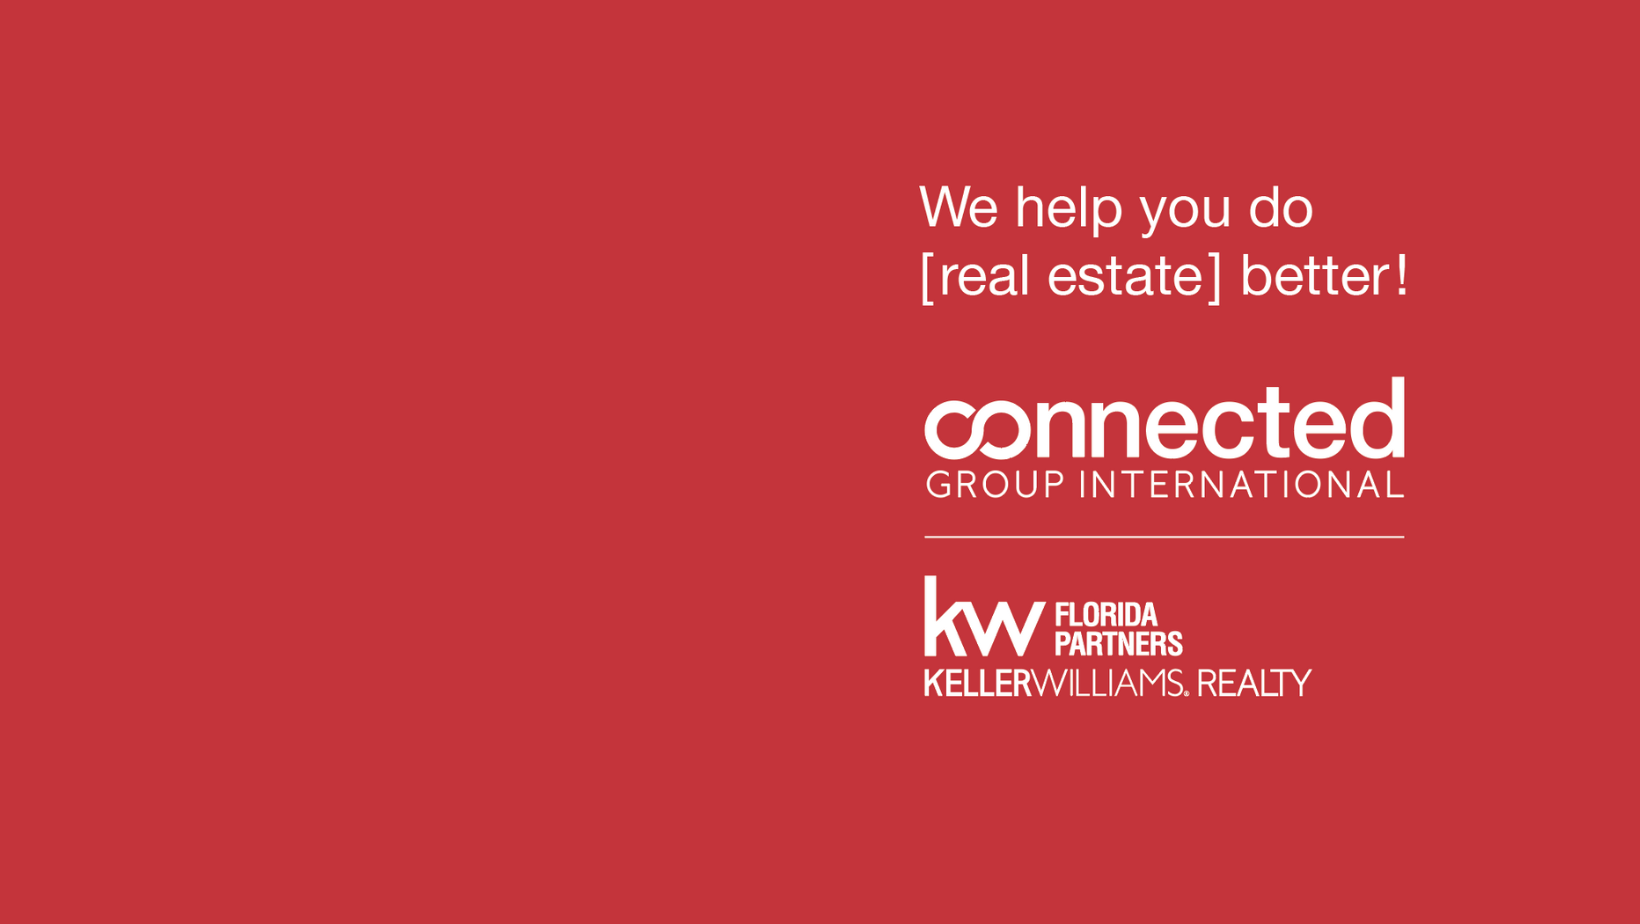 Connected Group International with Keller Williams Realty Florida Partners